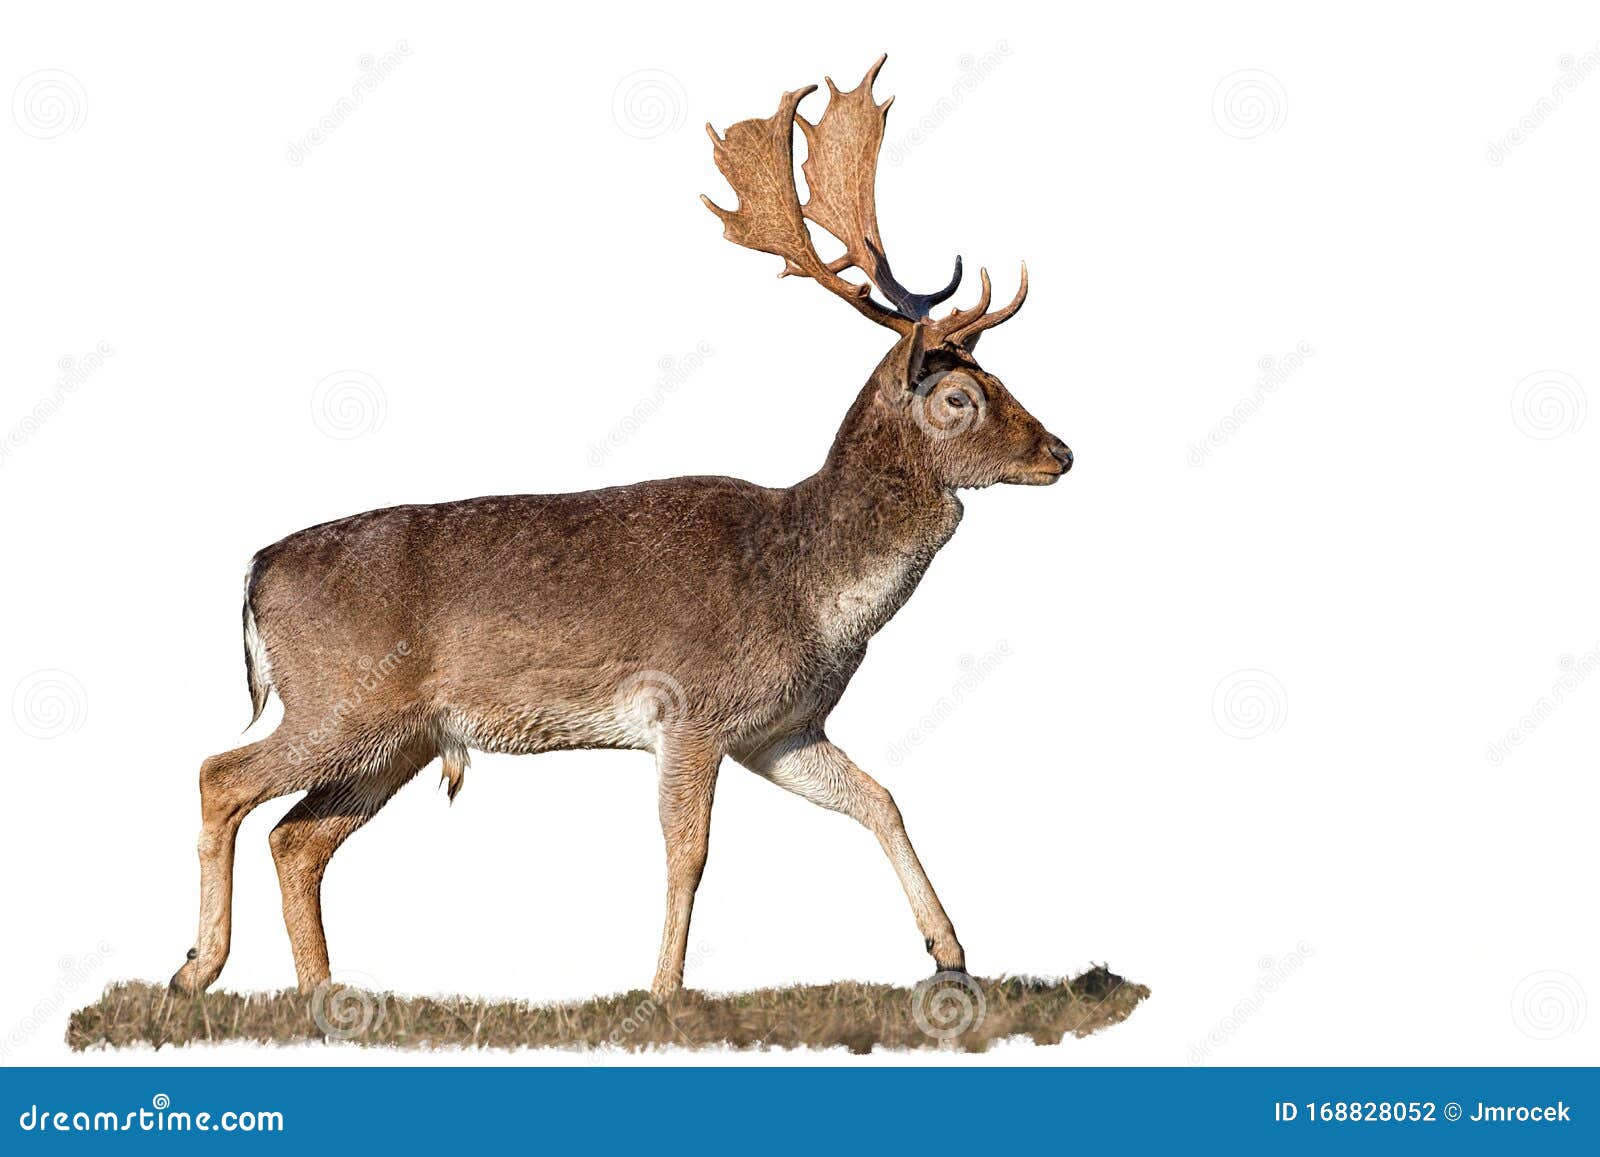 fallow deer, dama dama, stag with antlers  on white